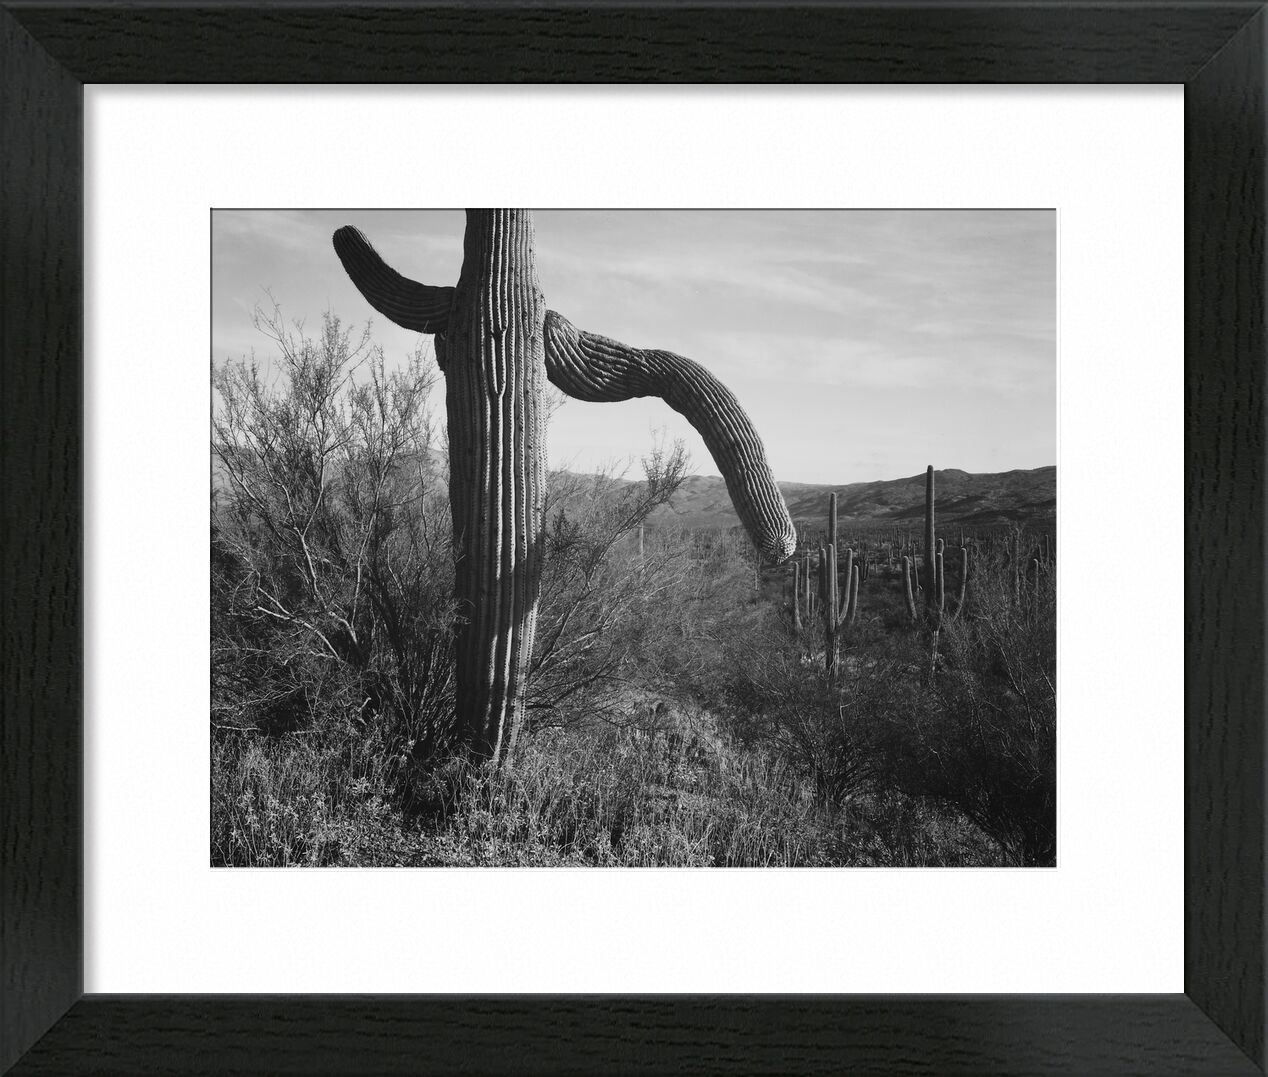 Cactus At Left And Surroundings - Ansel Adams desde Bellas artes, Prodi Art, ANSEL ADAMS, cactus, desierto, blanco y negro